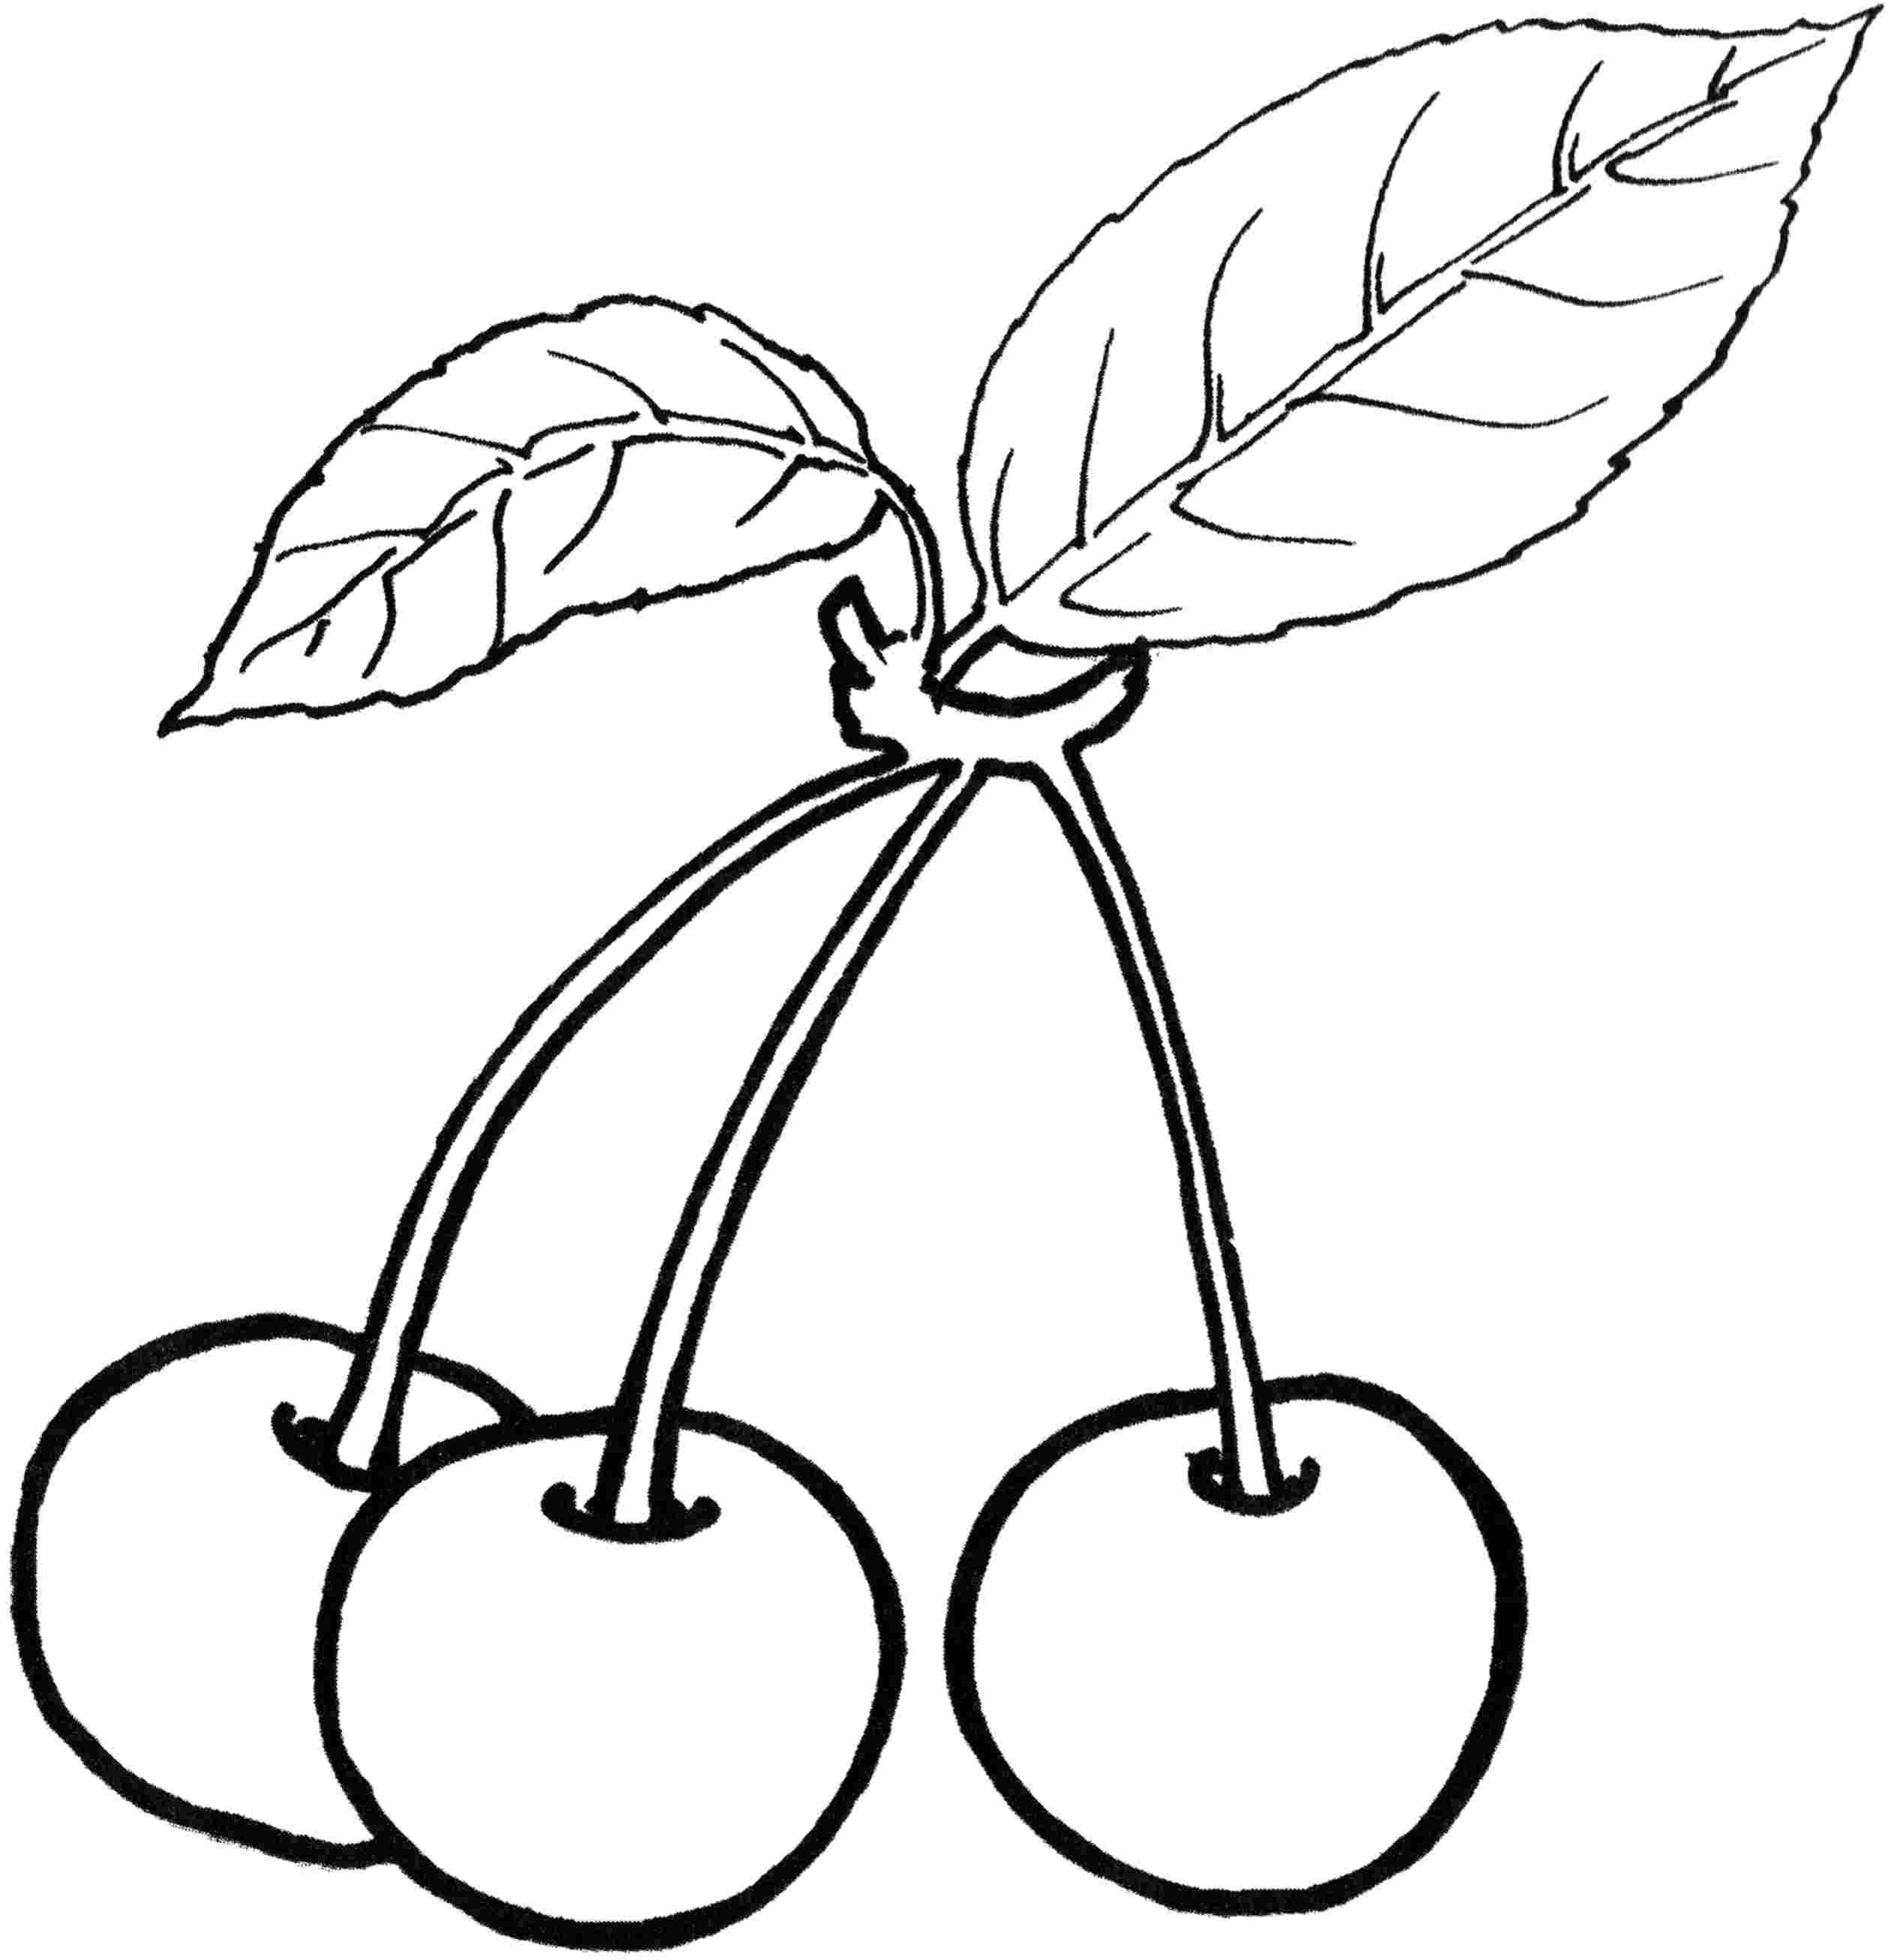 Berries clipart outline. Fruit and coloring pages